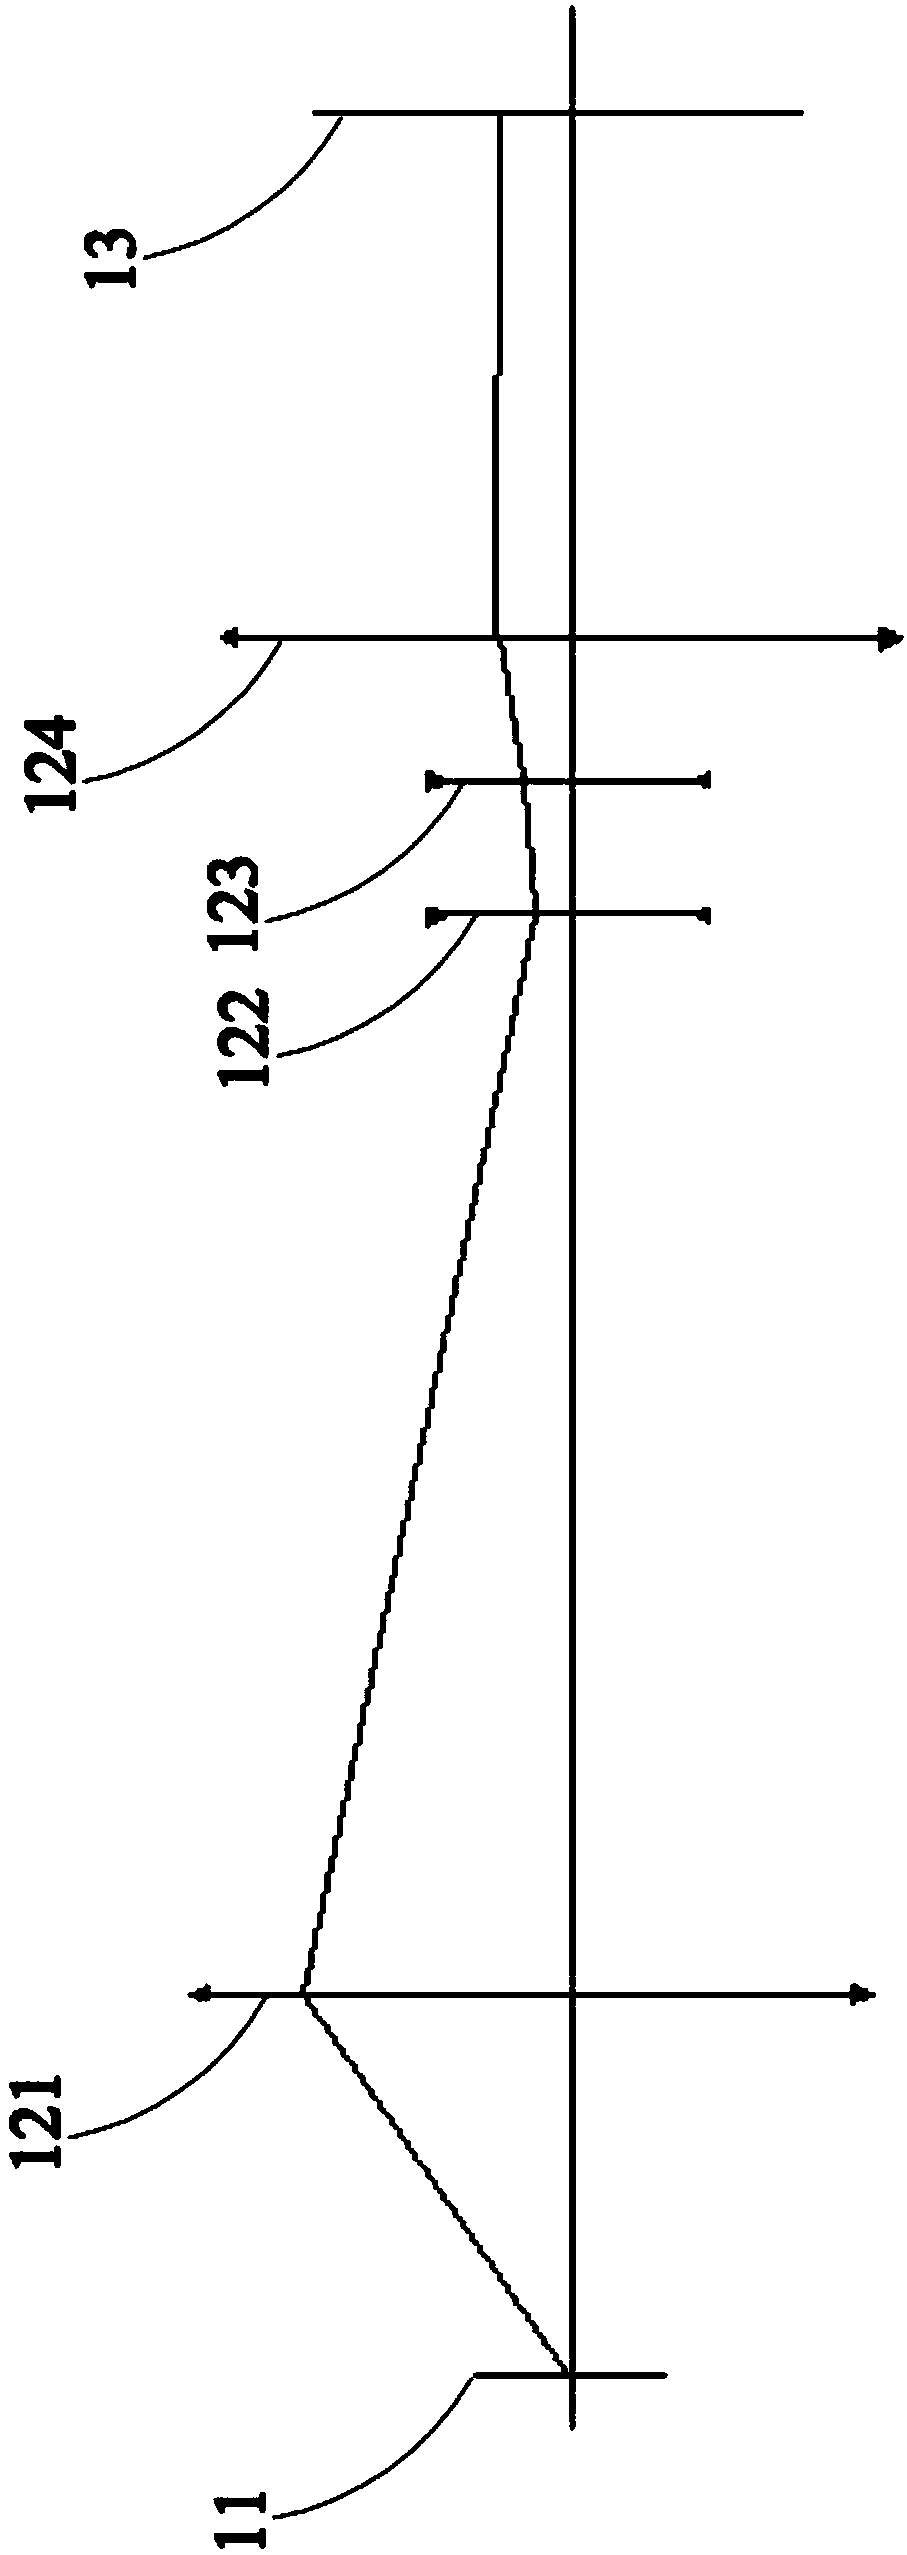 Double-telecentric optical detection device with variable multiplying power